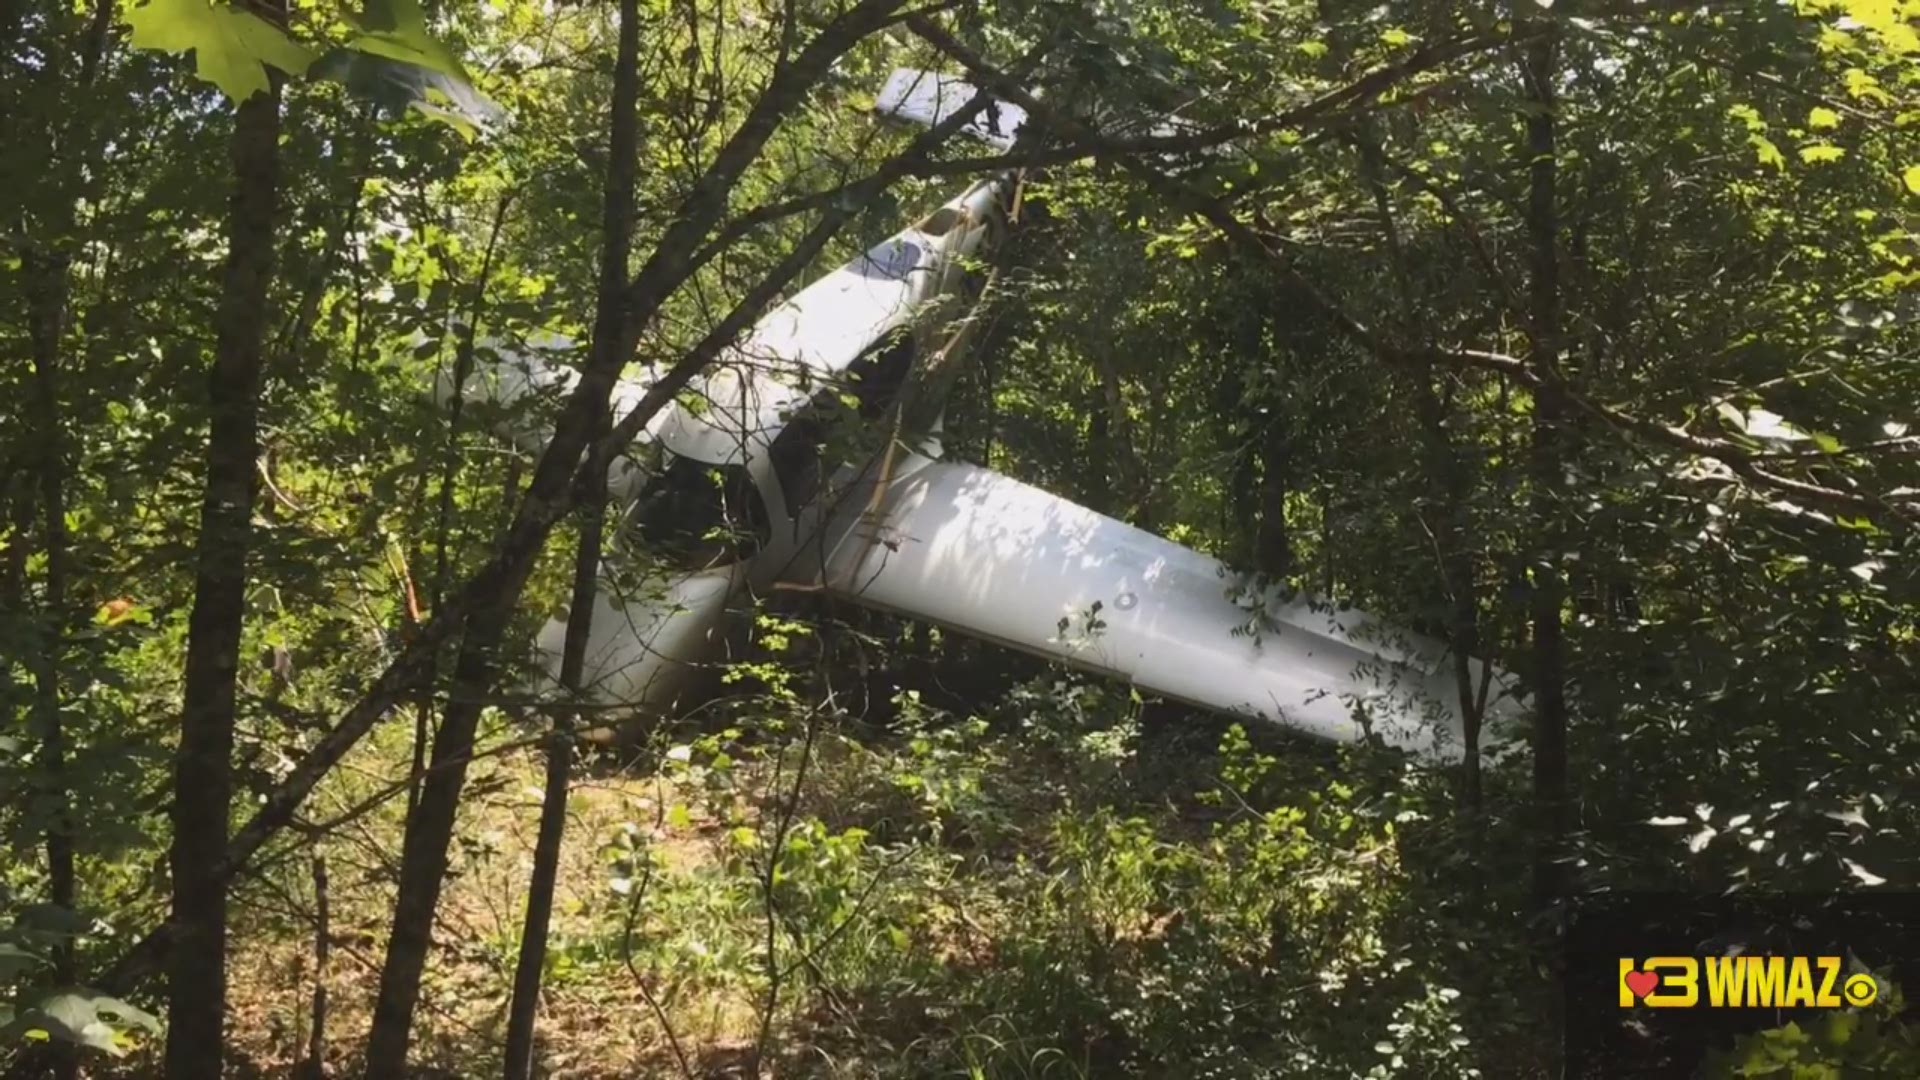 A close look at the plane crash in Twiggs County